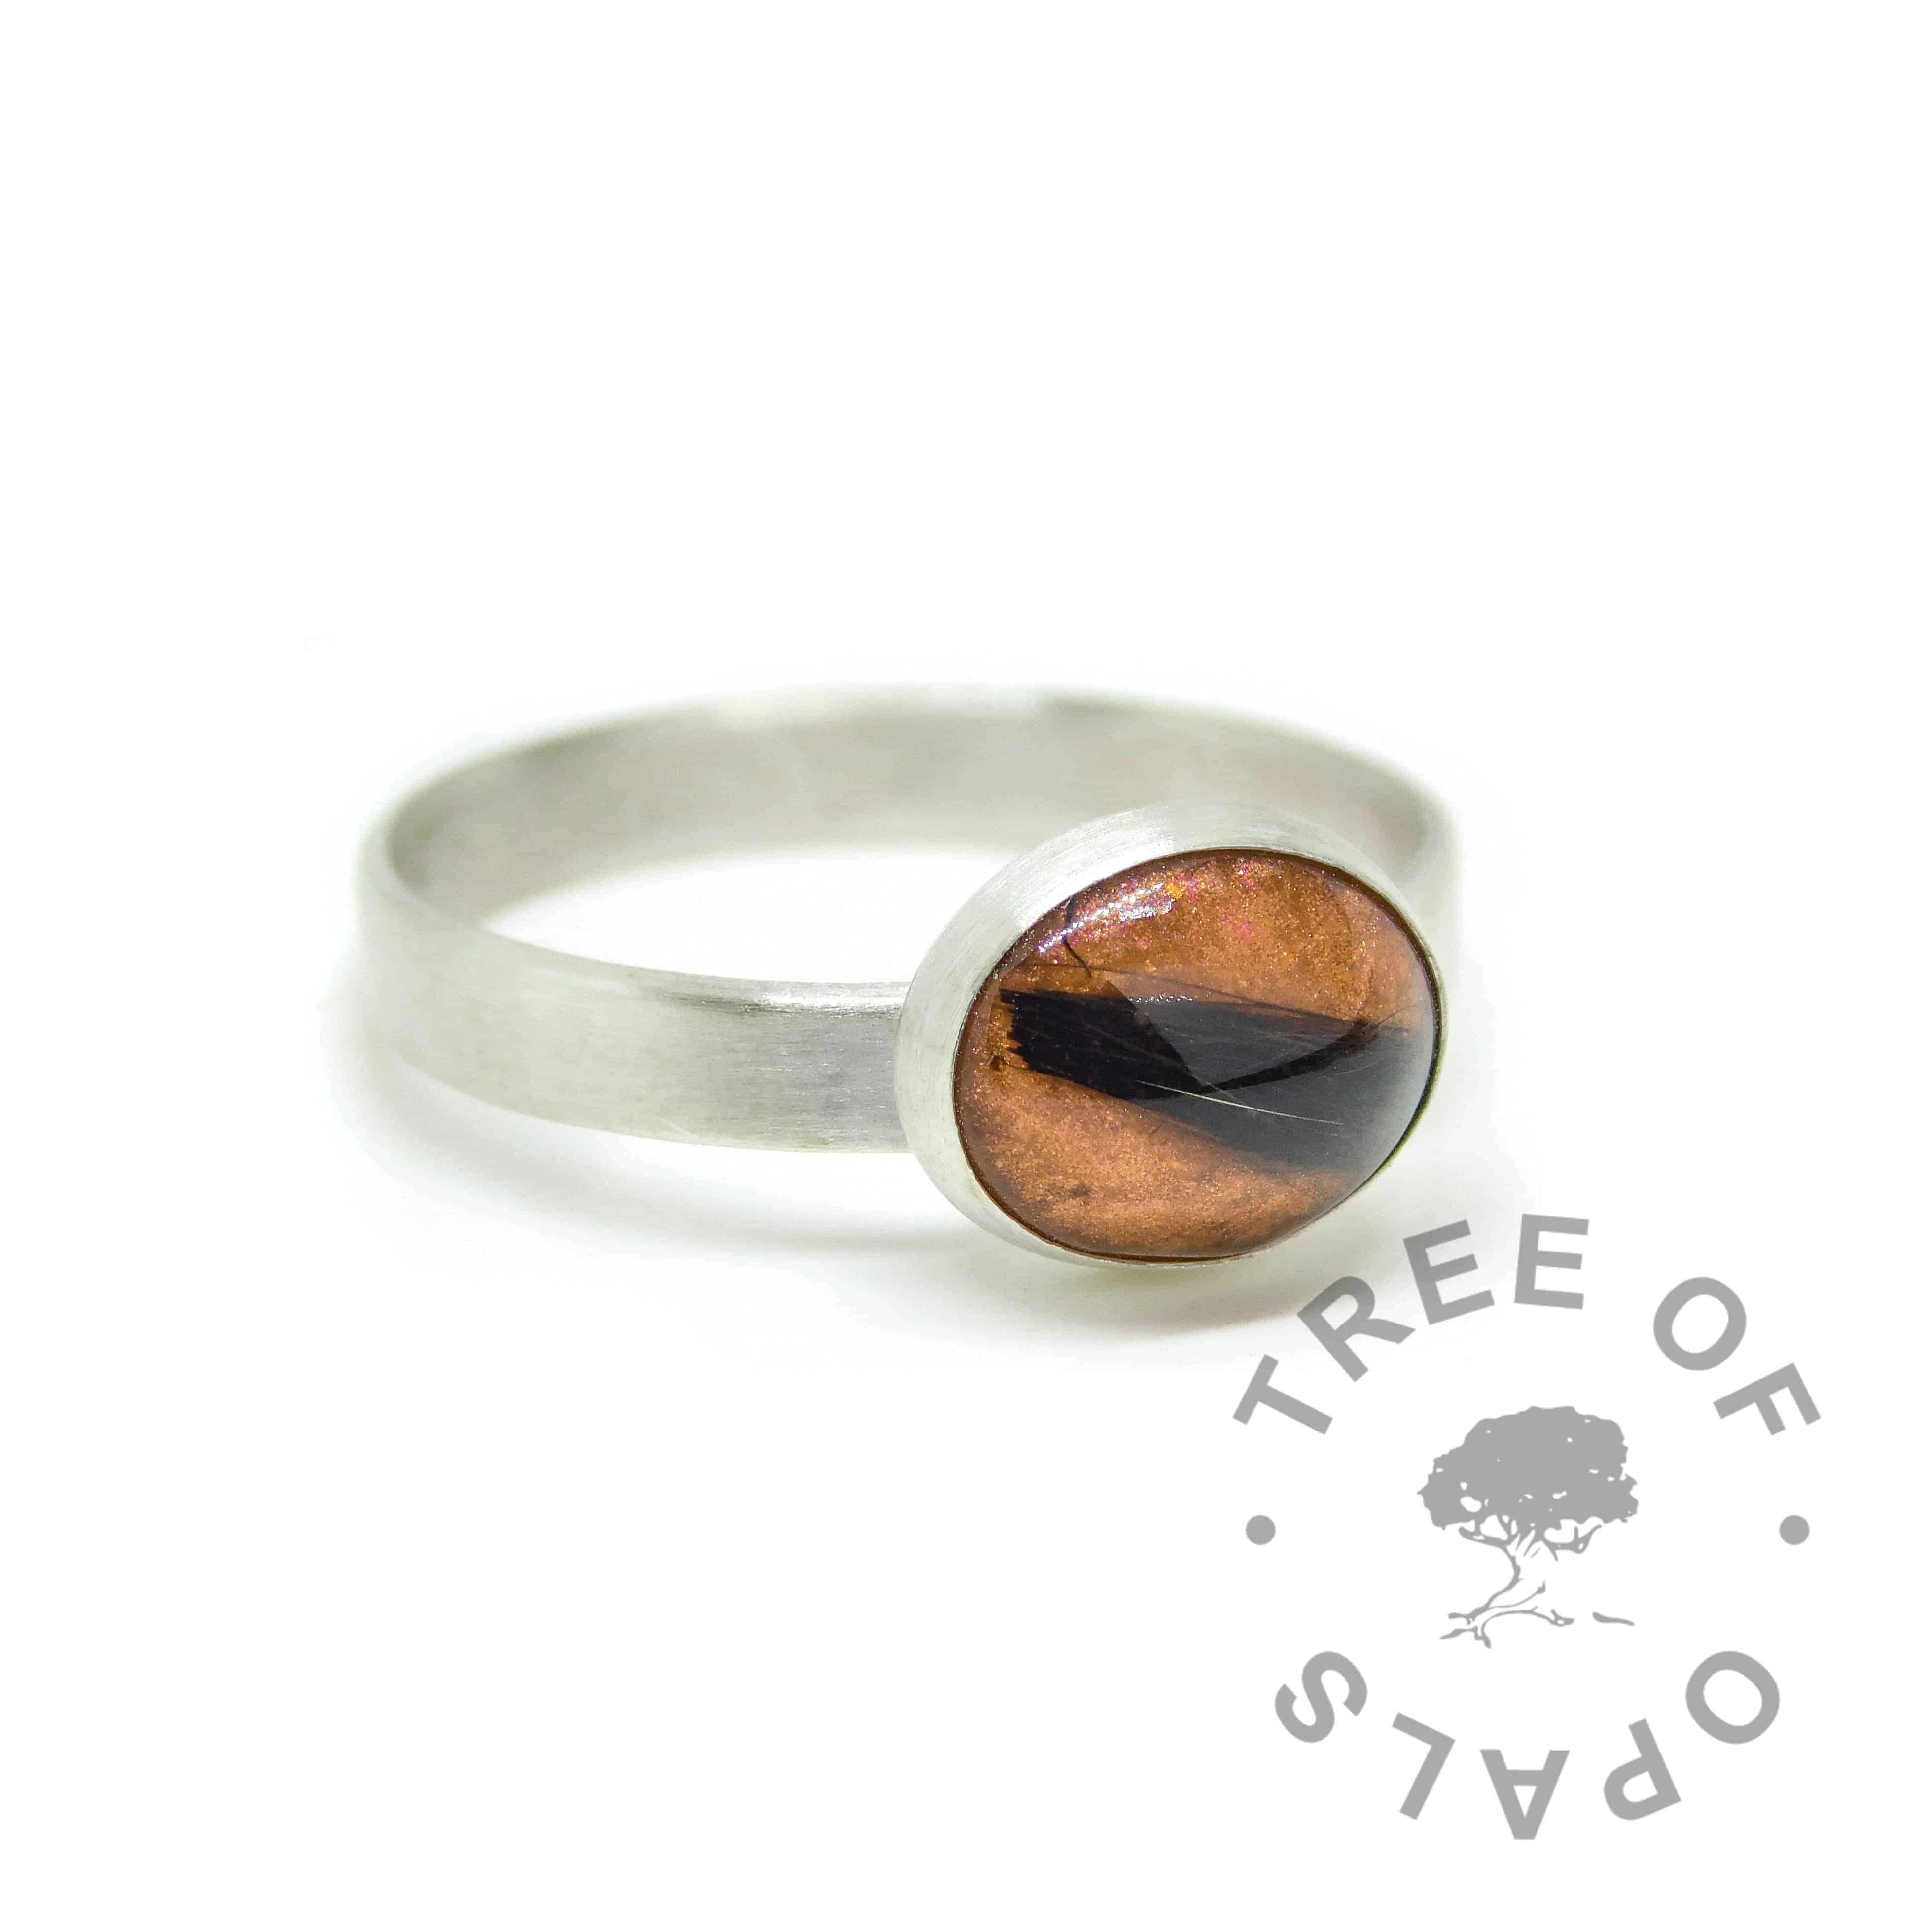 Tangerine orange lock of hair ring on brushed wire band. Solid sterling EcoSilver handmade ring. 10x8mm bezel cup rubbed over the cabochon for security.